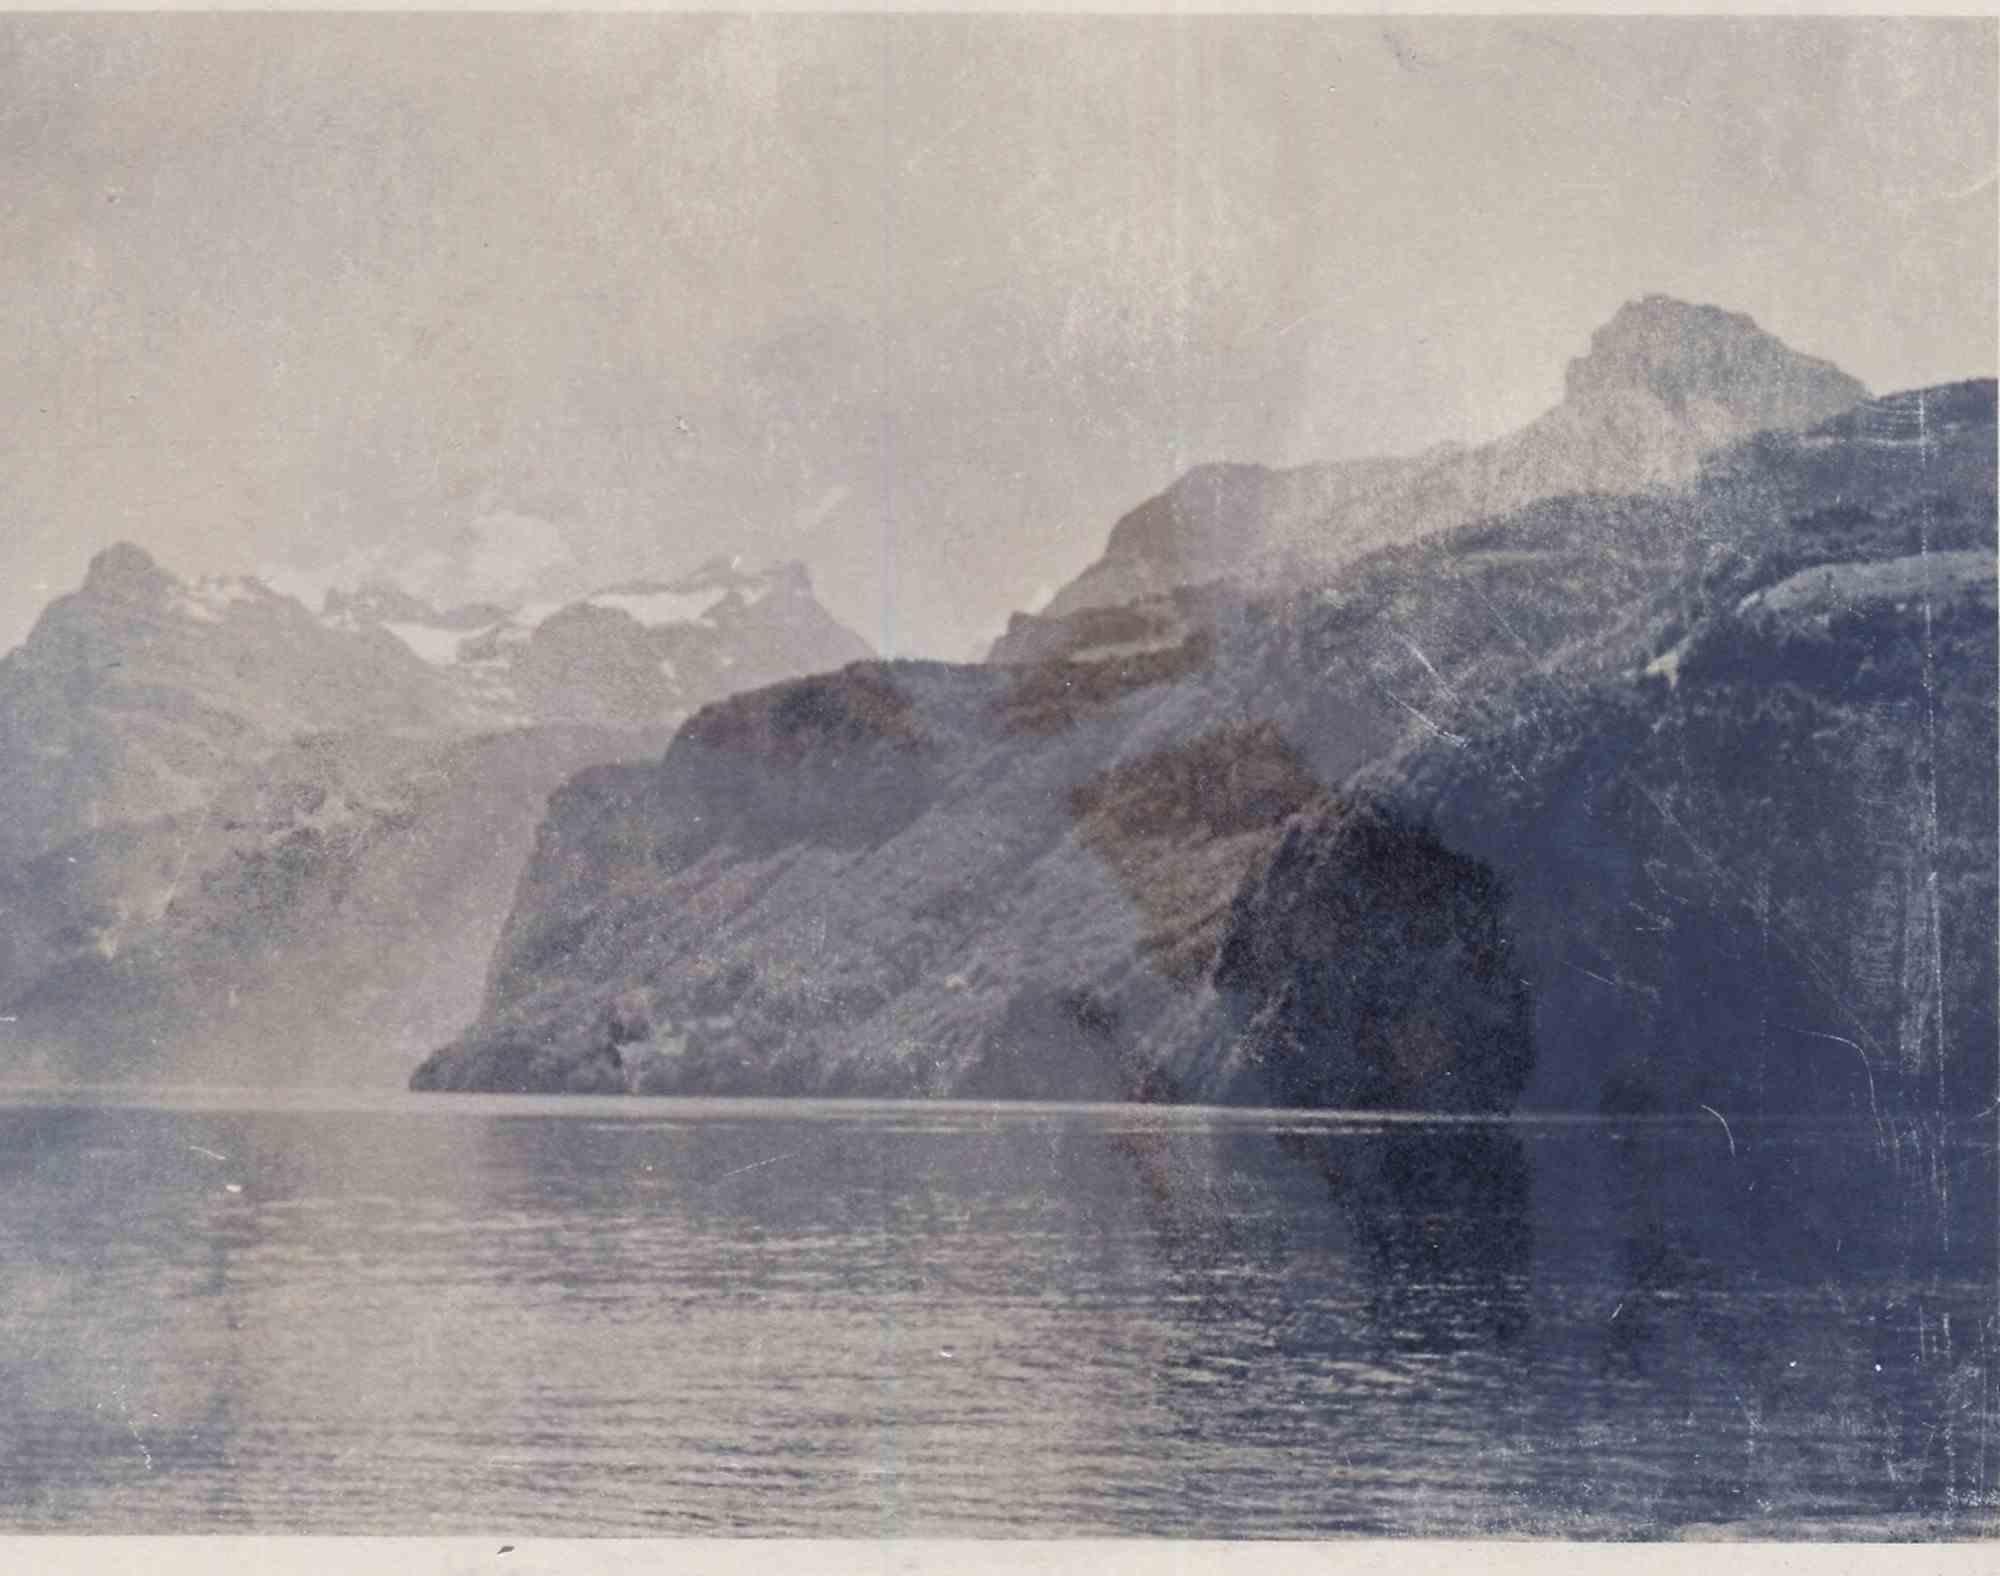 Unknown Landscape Photograph - Old days Photo - Mountain and Lake - Vintage Photo - Mid-20th Century